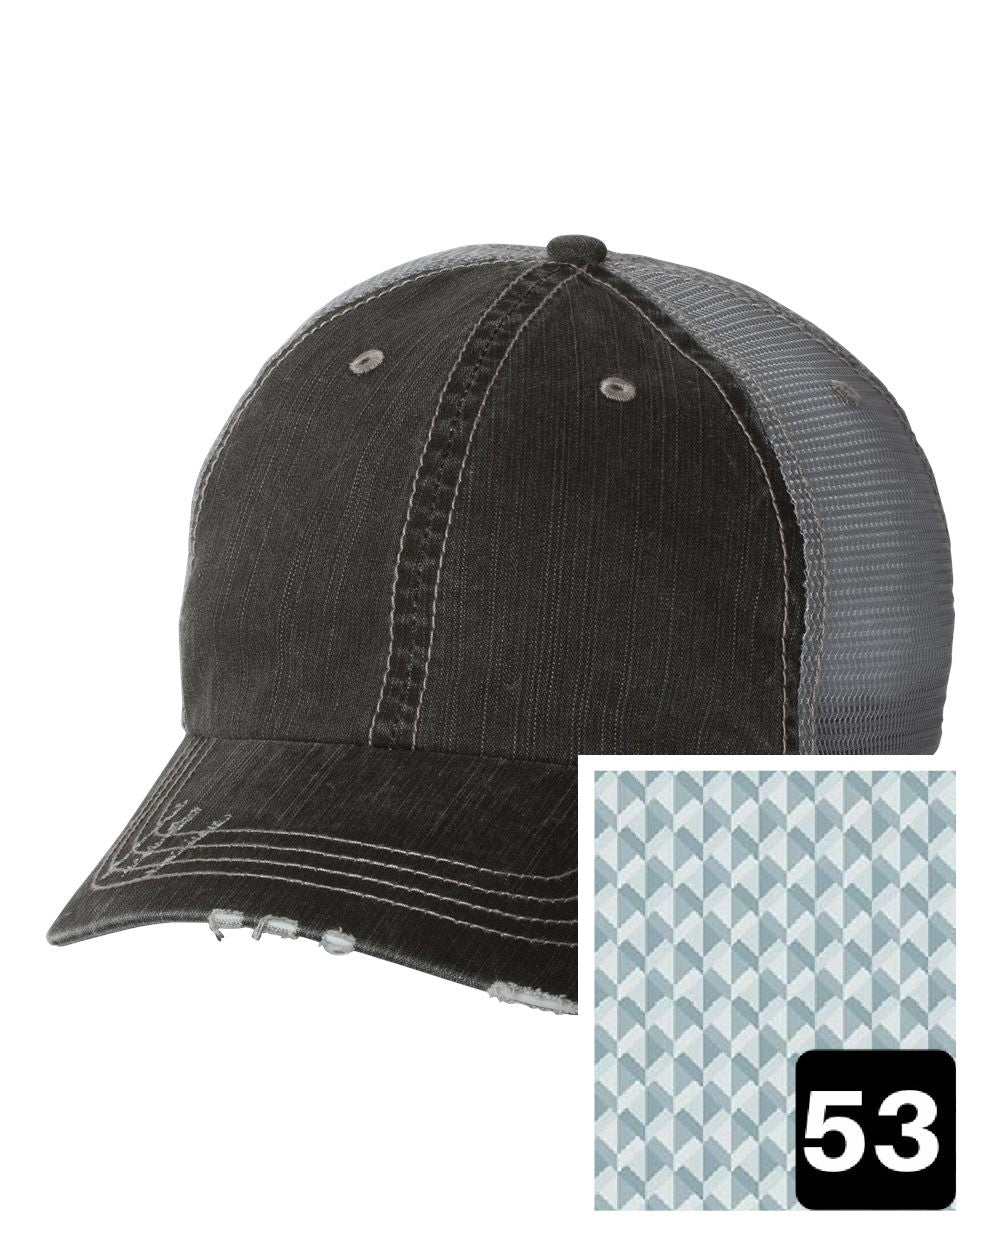 gray distressed trucker hat with multi-color stripe fabric state of Indiana